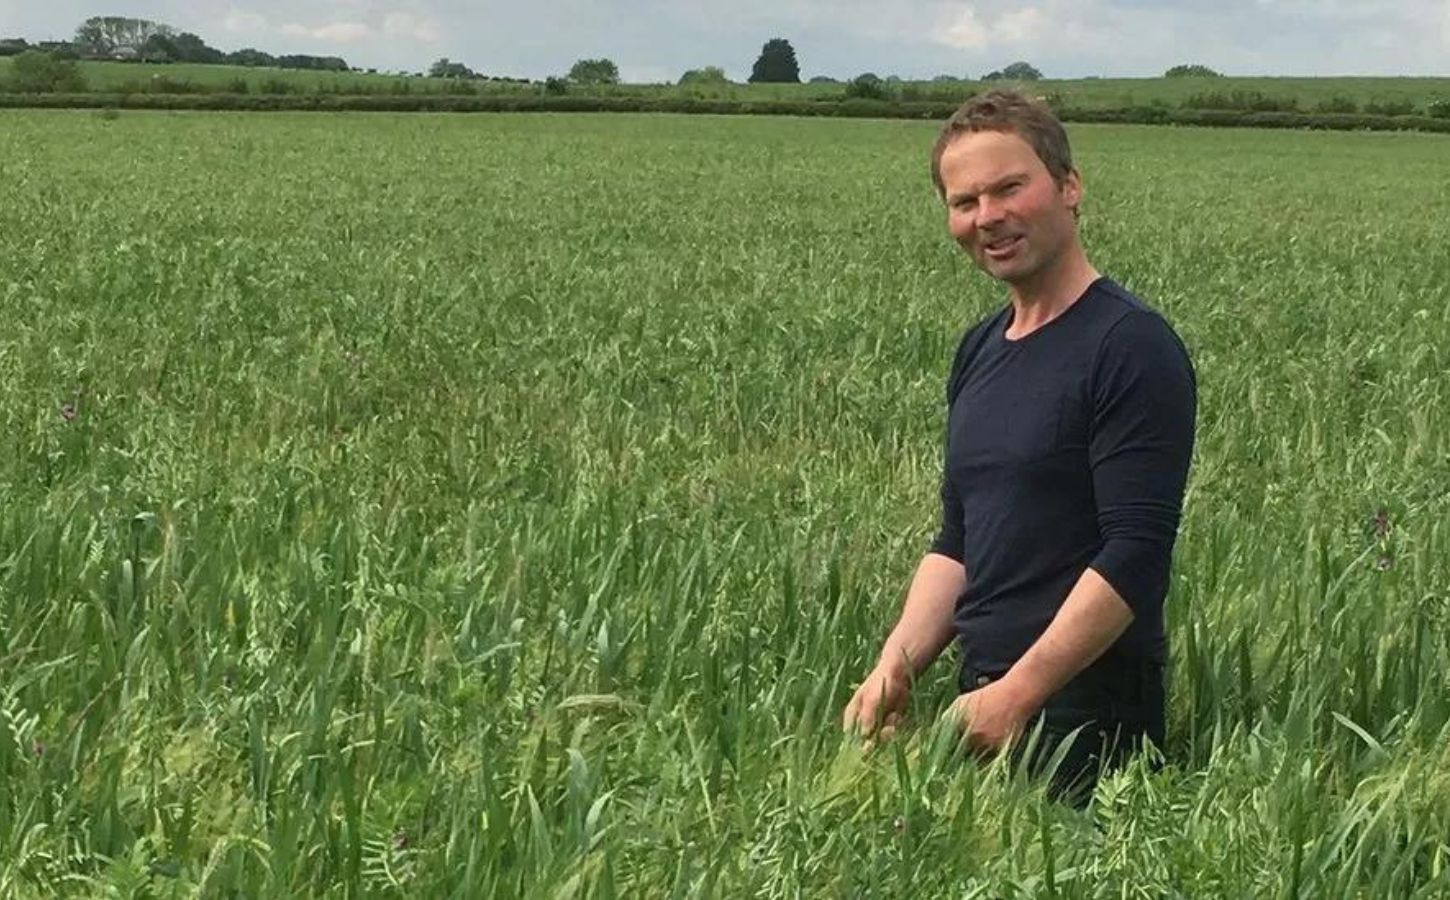 Former dairy cow farmer Laurence Candy, who has turned his farm vegan, standing in a field